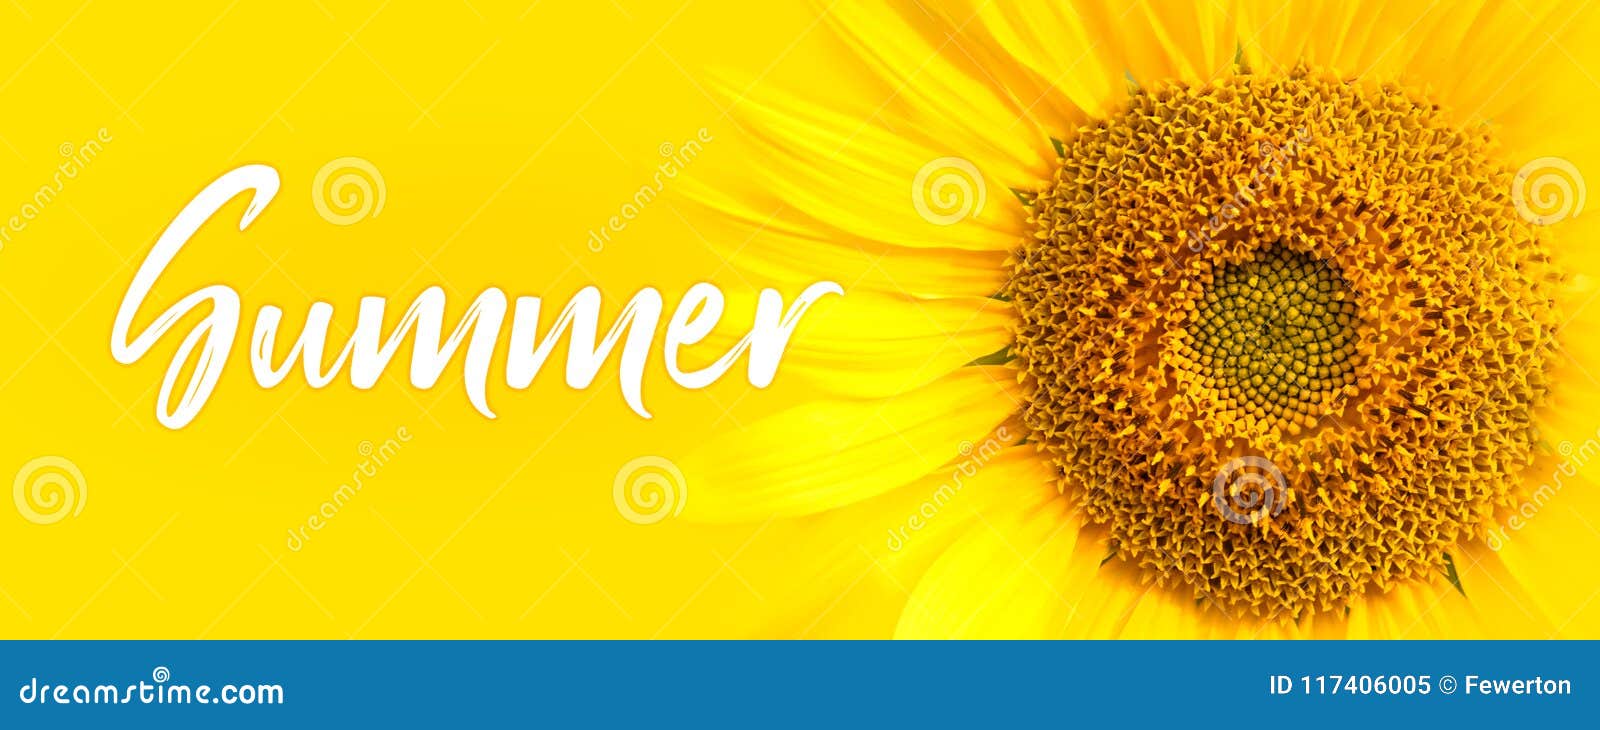 summer text and sunflower close-up details. oncept for summer, sun, sunshine, tropical summer travel and hot days.